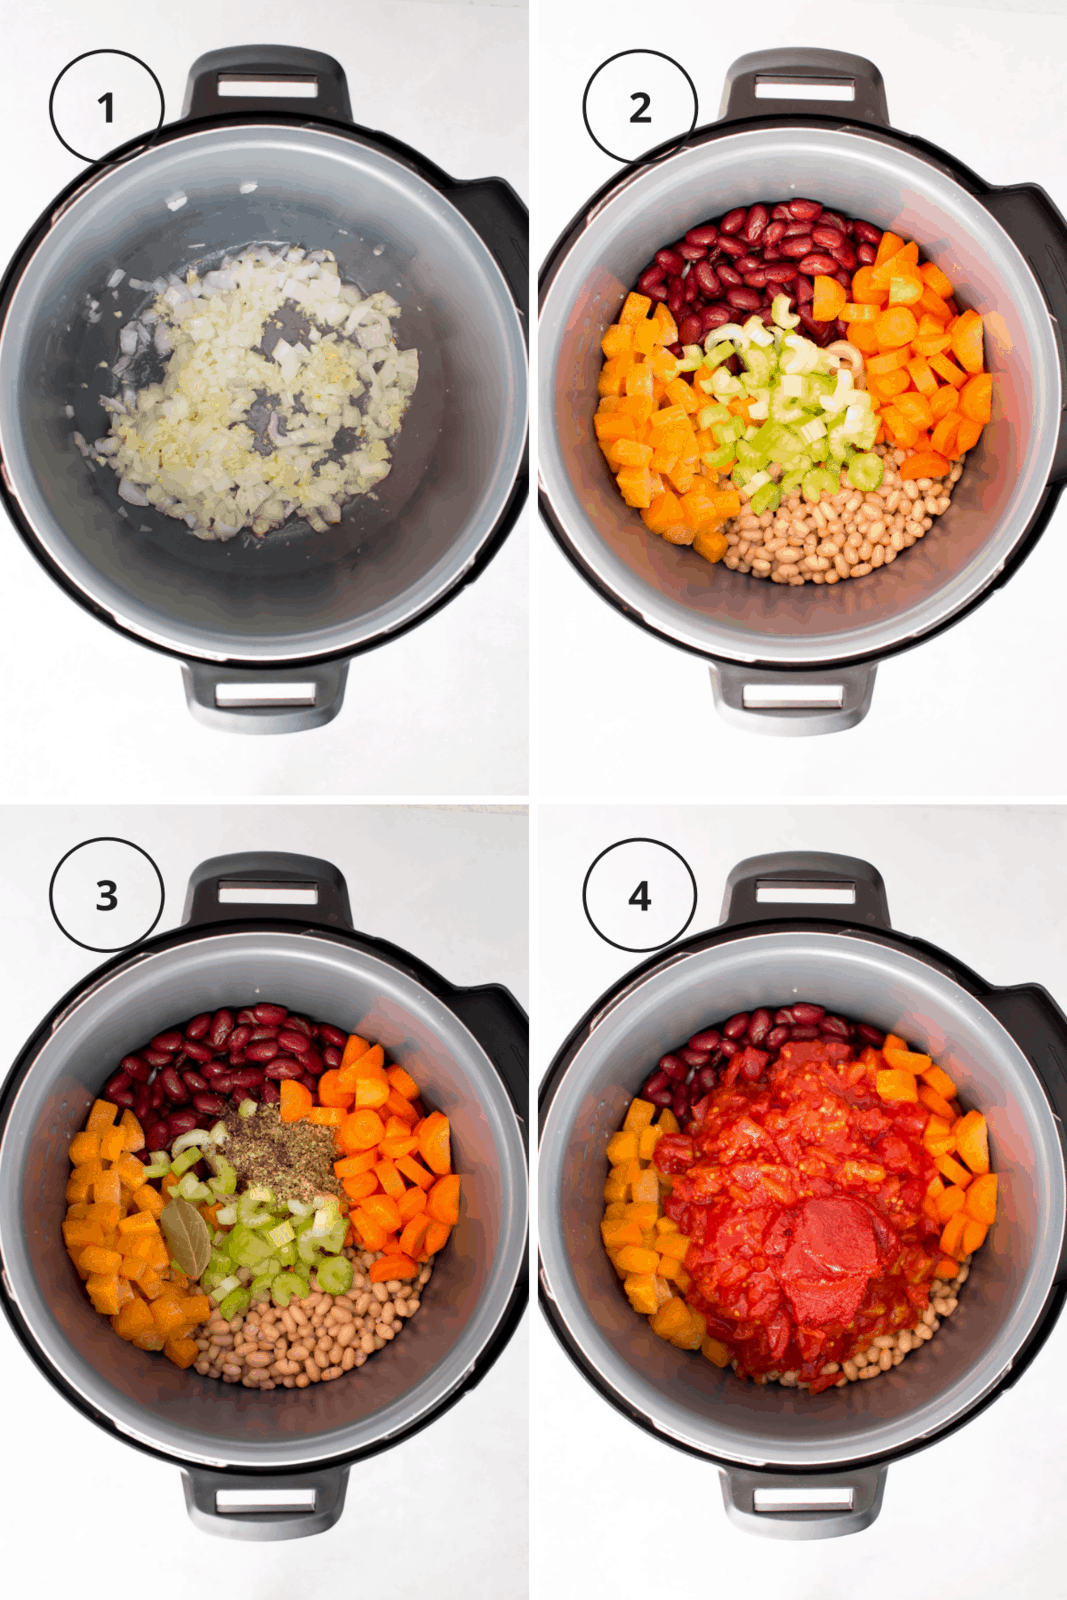 Step by step instructions for making minestrone in the Instant Pot.